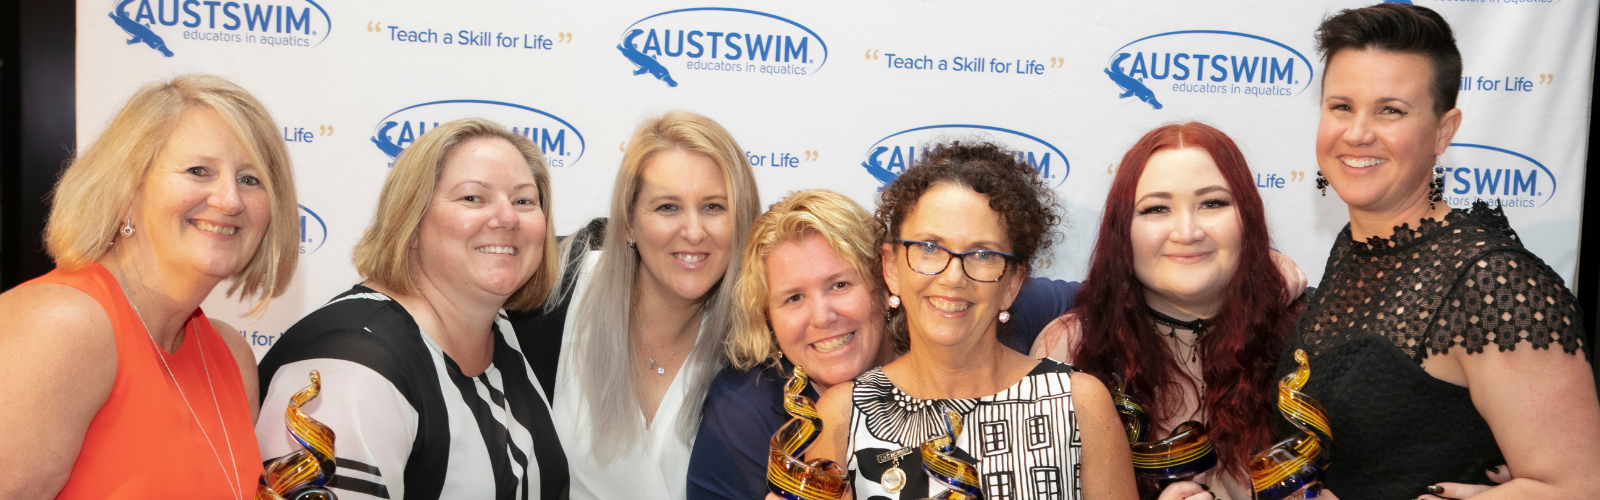 AUSTSWIM Awards Hero Image with award recipients from 2019